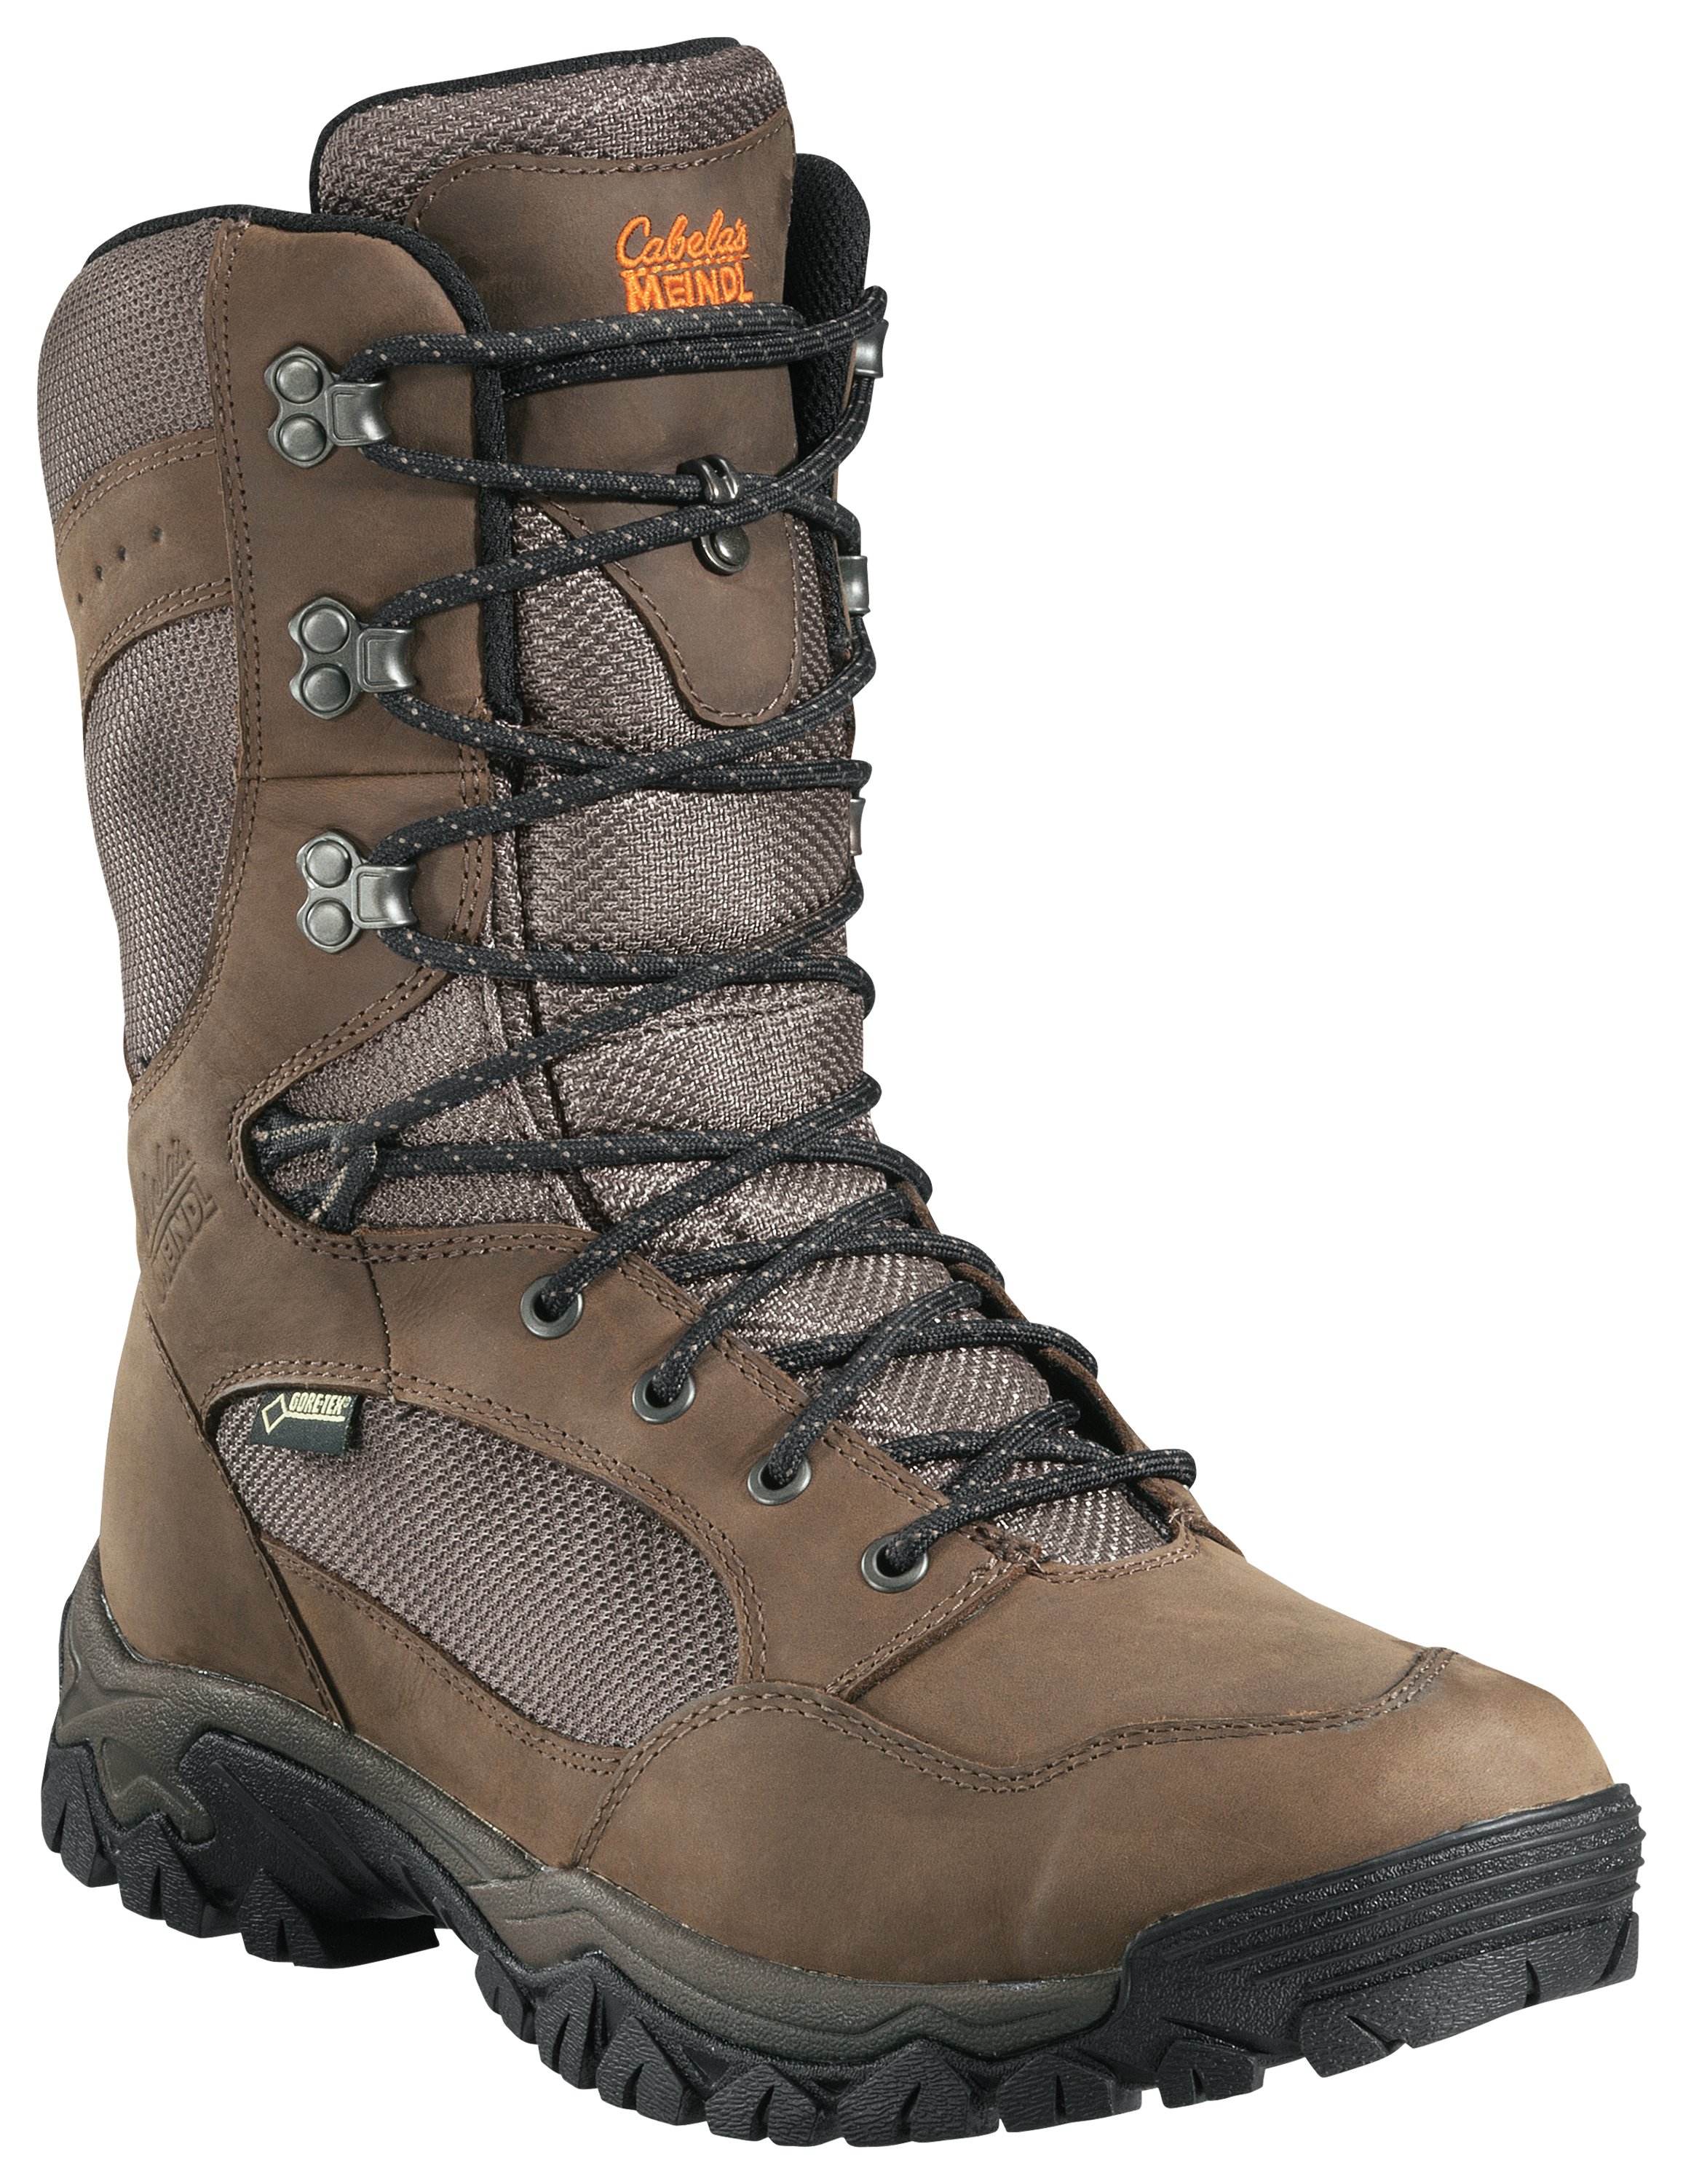 operator Portugees Hymne Cabela's MEINDL Ultralight GORE-TEX Hunting Boots for Men | Cabela's